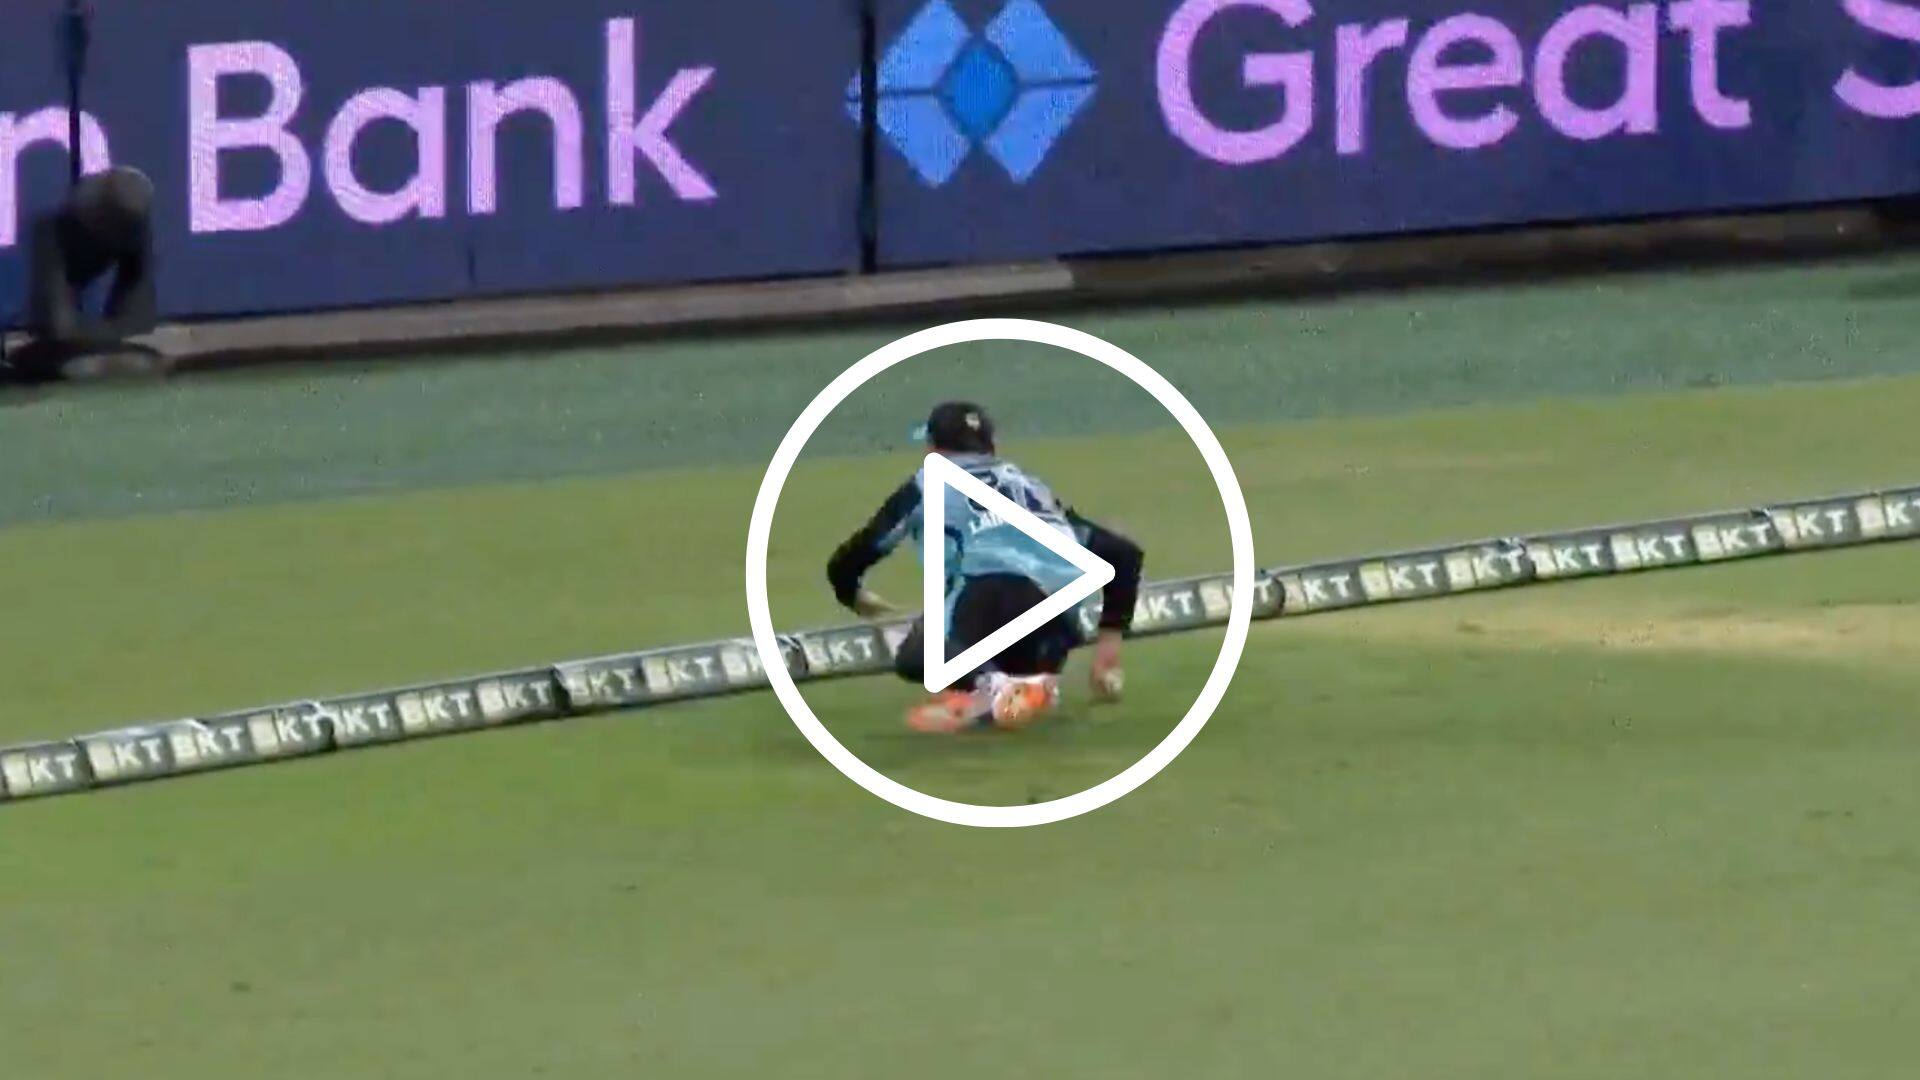 [Watch] Marnus Labuschagne's Heroic Boundary Save While On-Mic Talk With Commentator